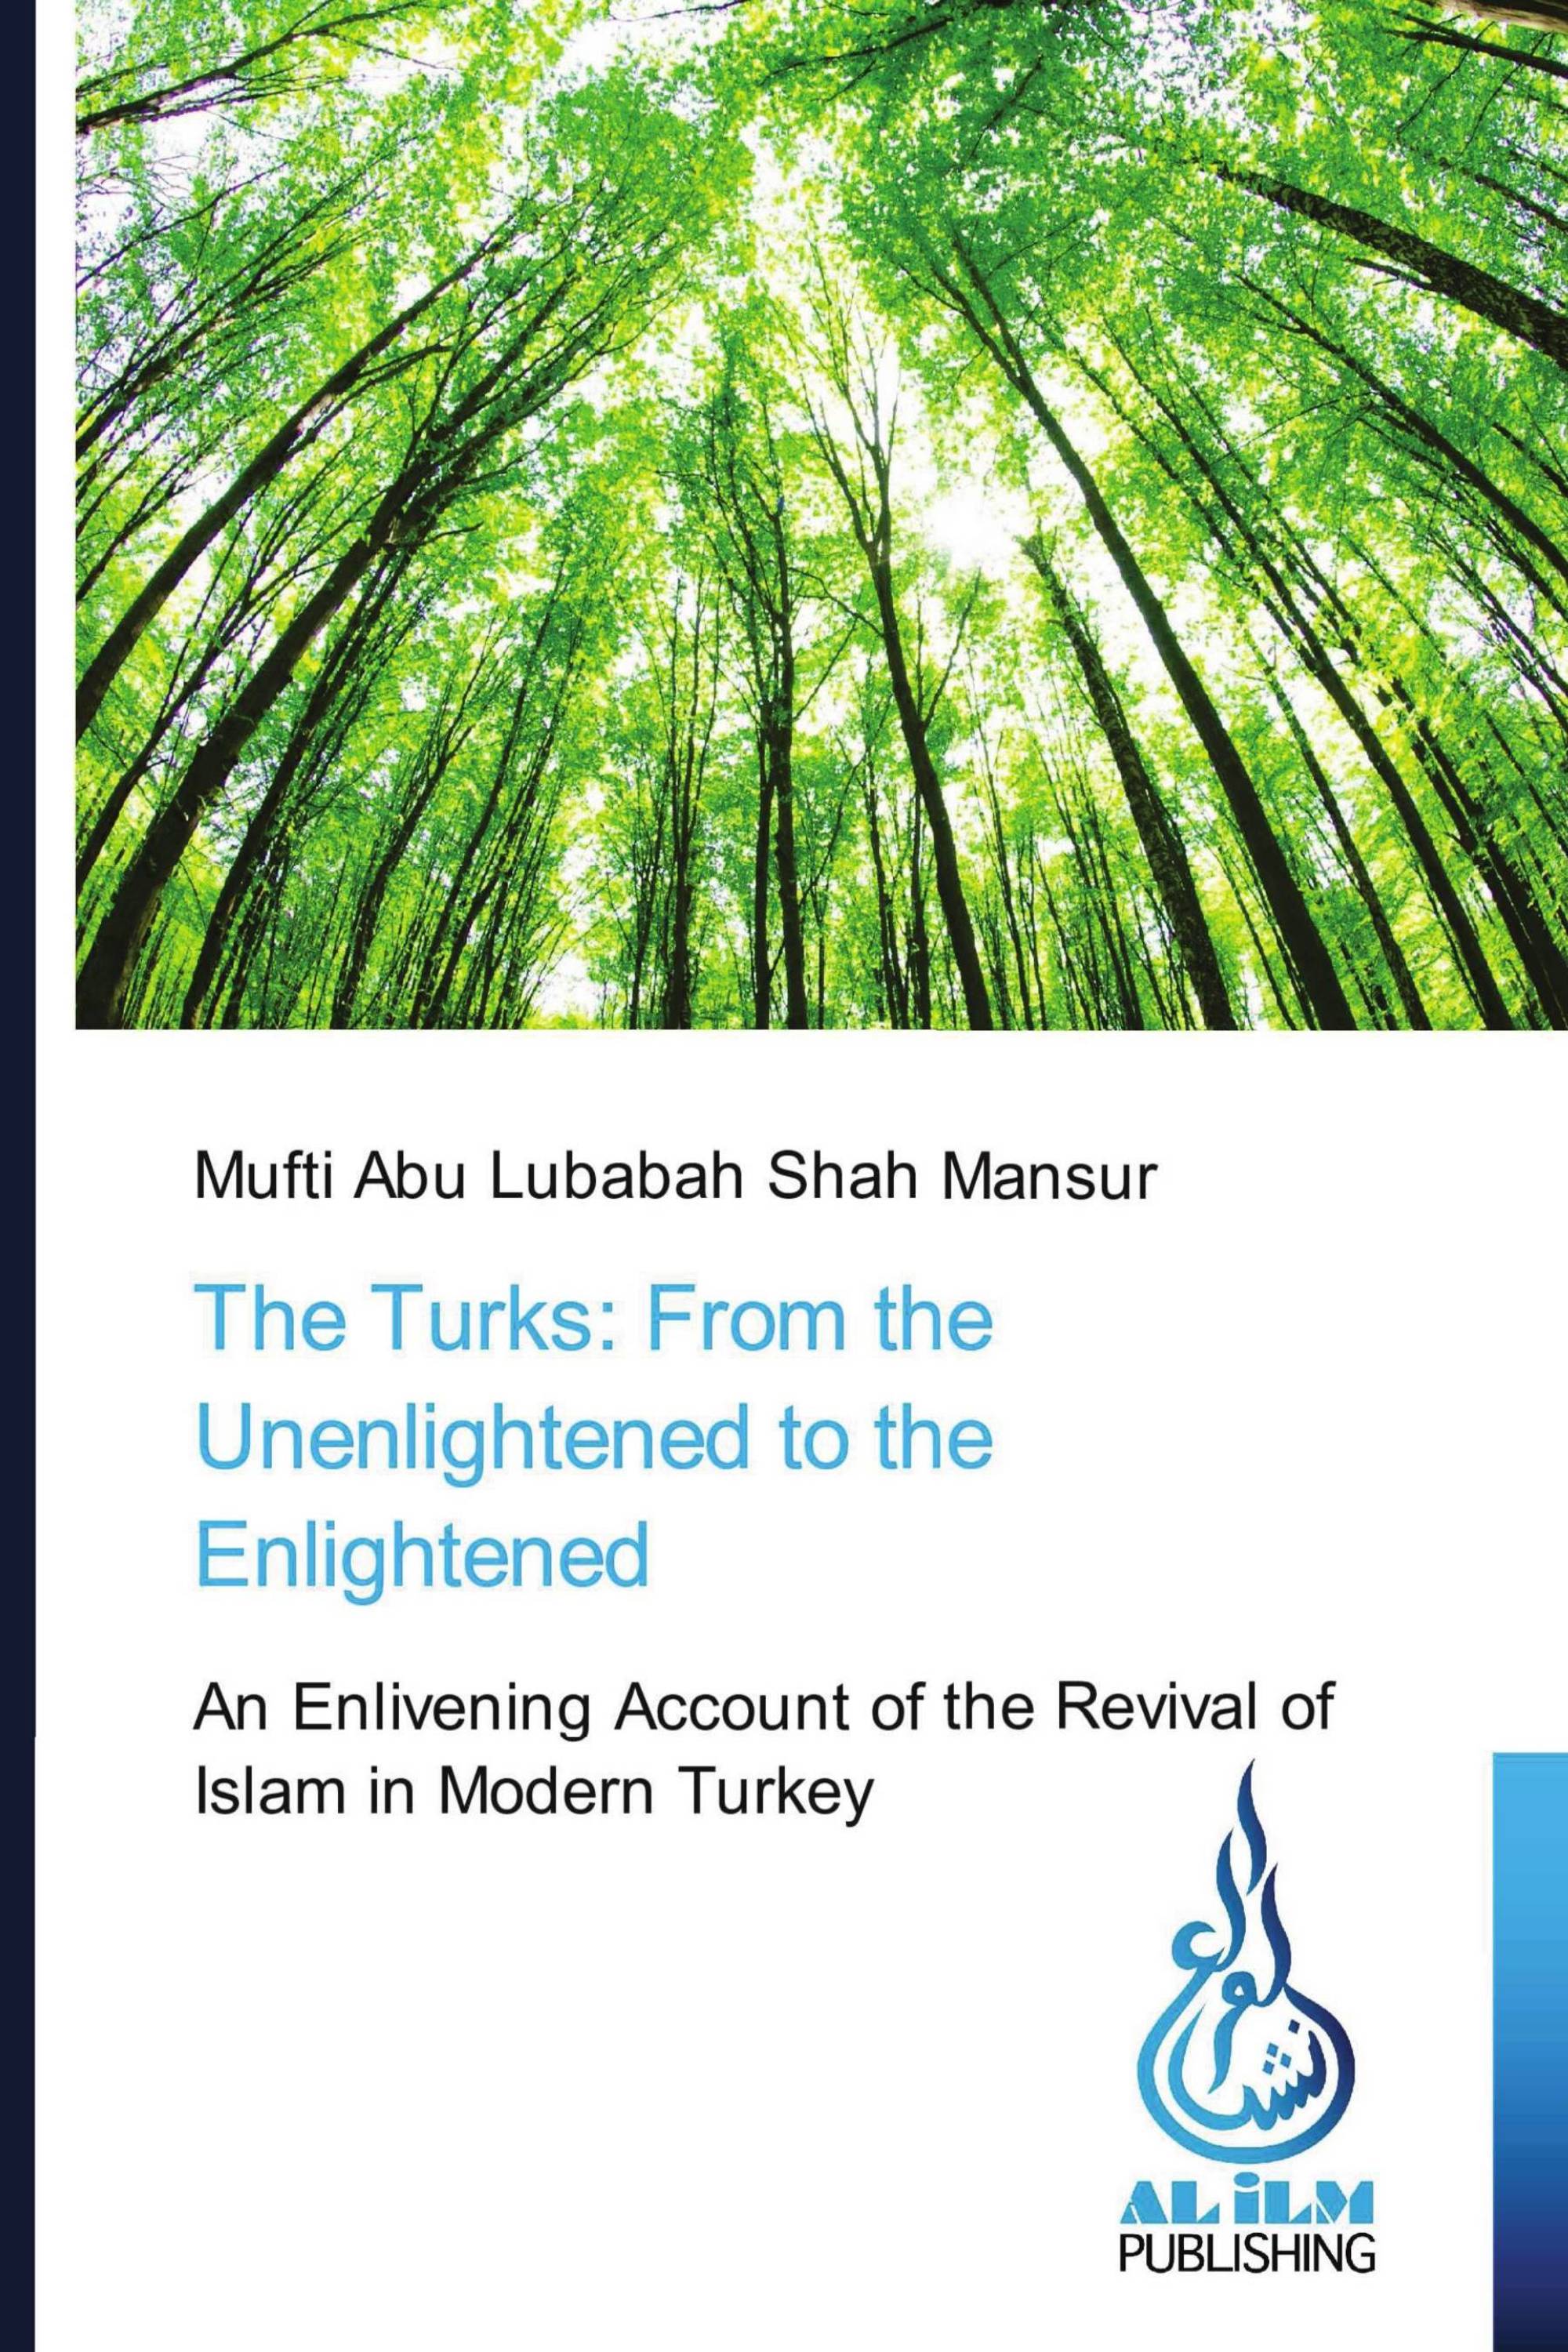 The Turks: From the Unenlightened to the Enlightened